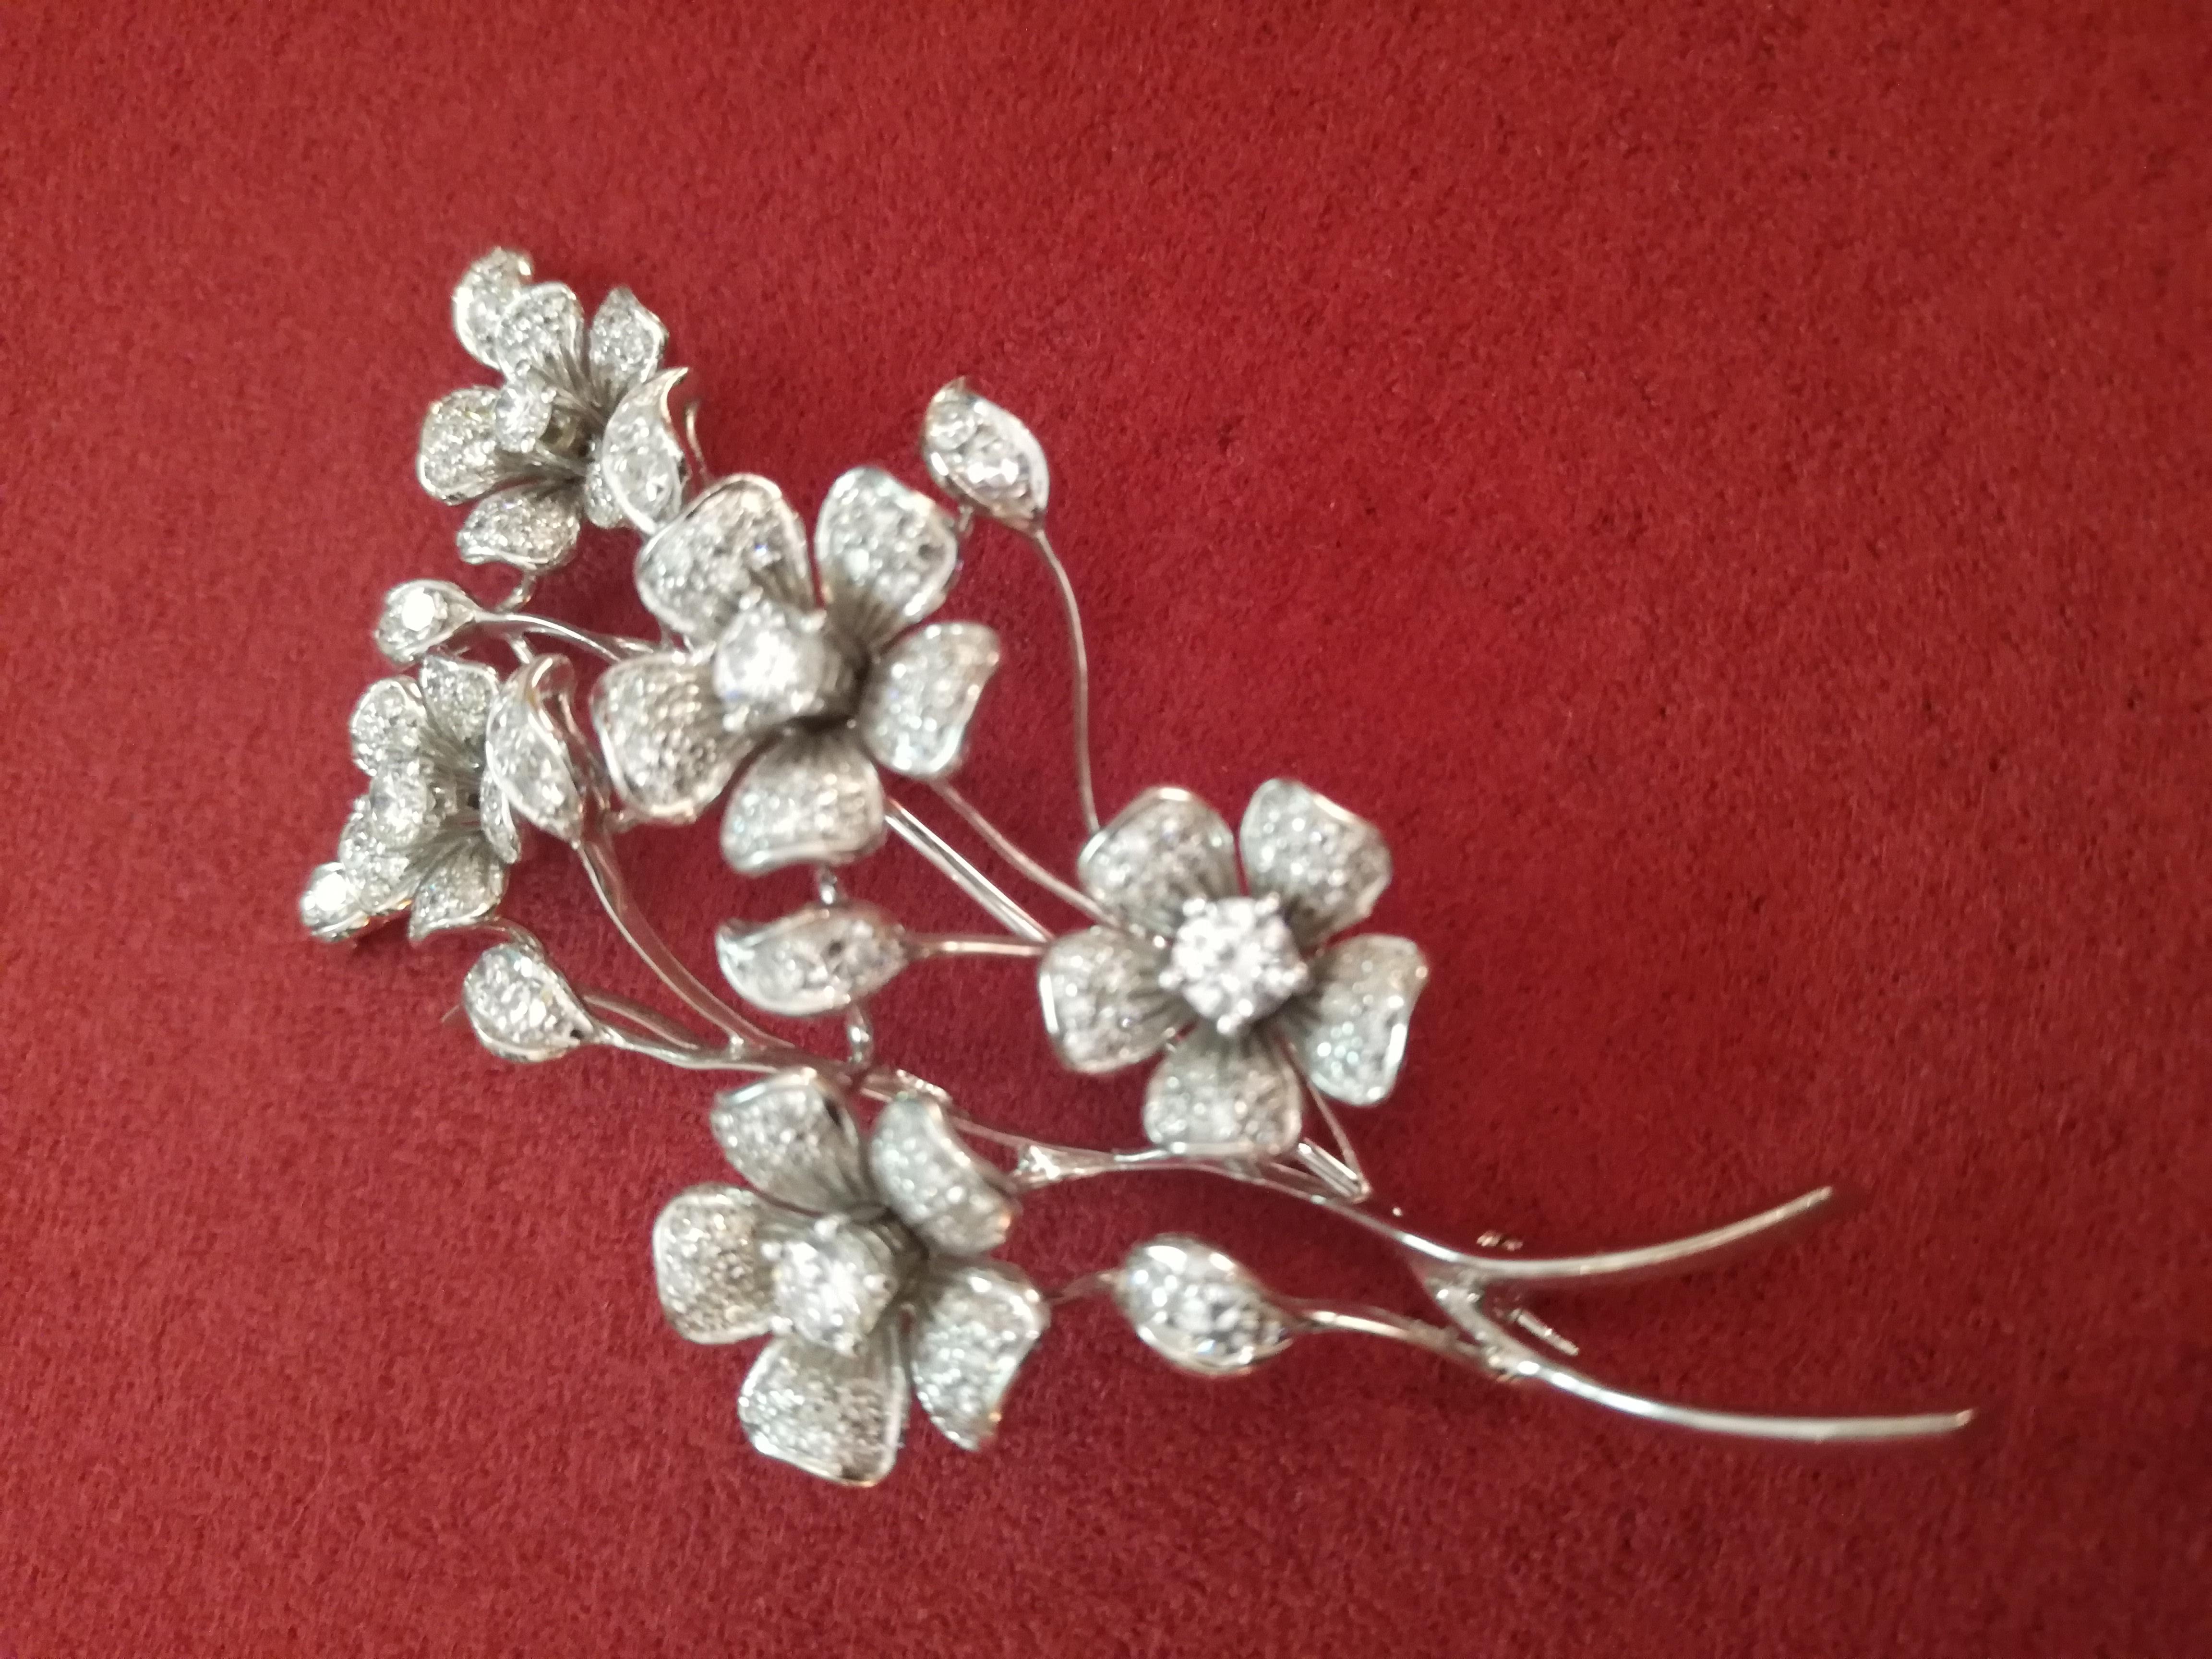 One of a kind Italian Art Deco flower bouquet diamond brooch. This is an impressive late 20th century Bouquet Brooch set in 18K white gold. Crafted entirely by hand this spectacular pin depicts a posy of five flowers accented with diamonds ( 3.80